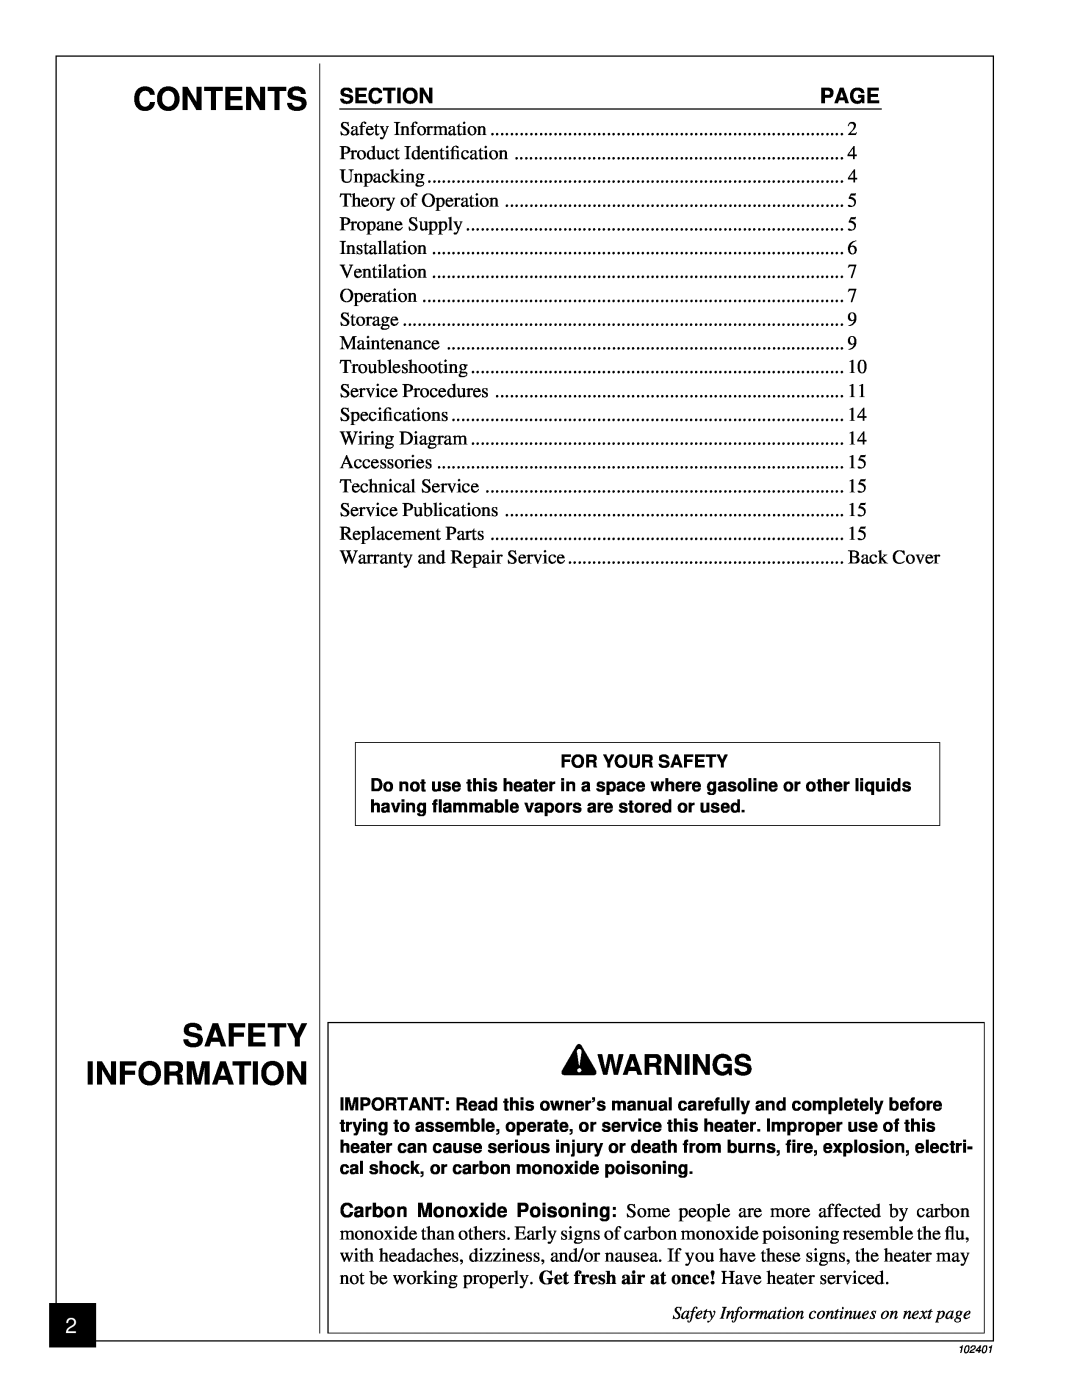 Desa RCLP50A owner manual Contents Safety Information, Warnings, Section, Page 